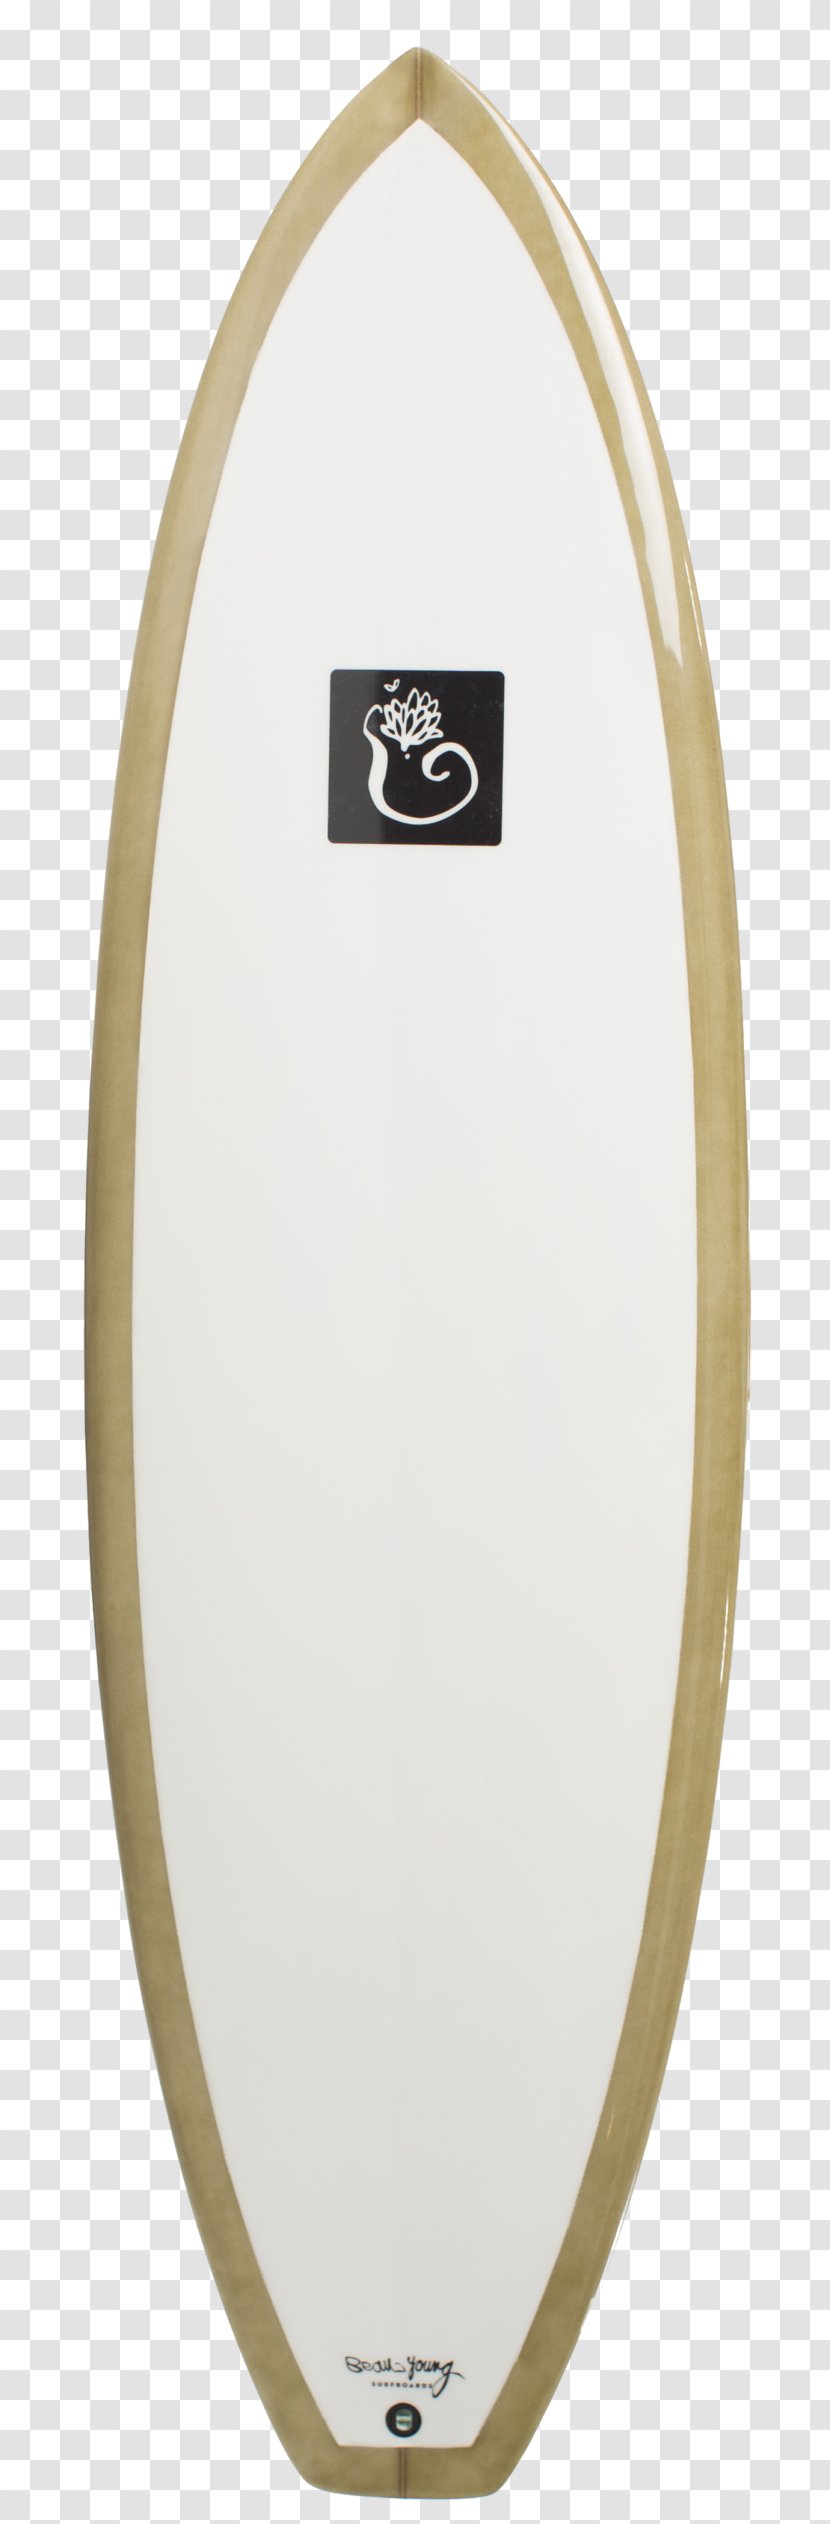 Surfboard Surfing Craft Stock - Tomato - SURF BOARD Transparent PNG